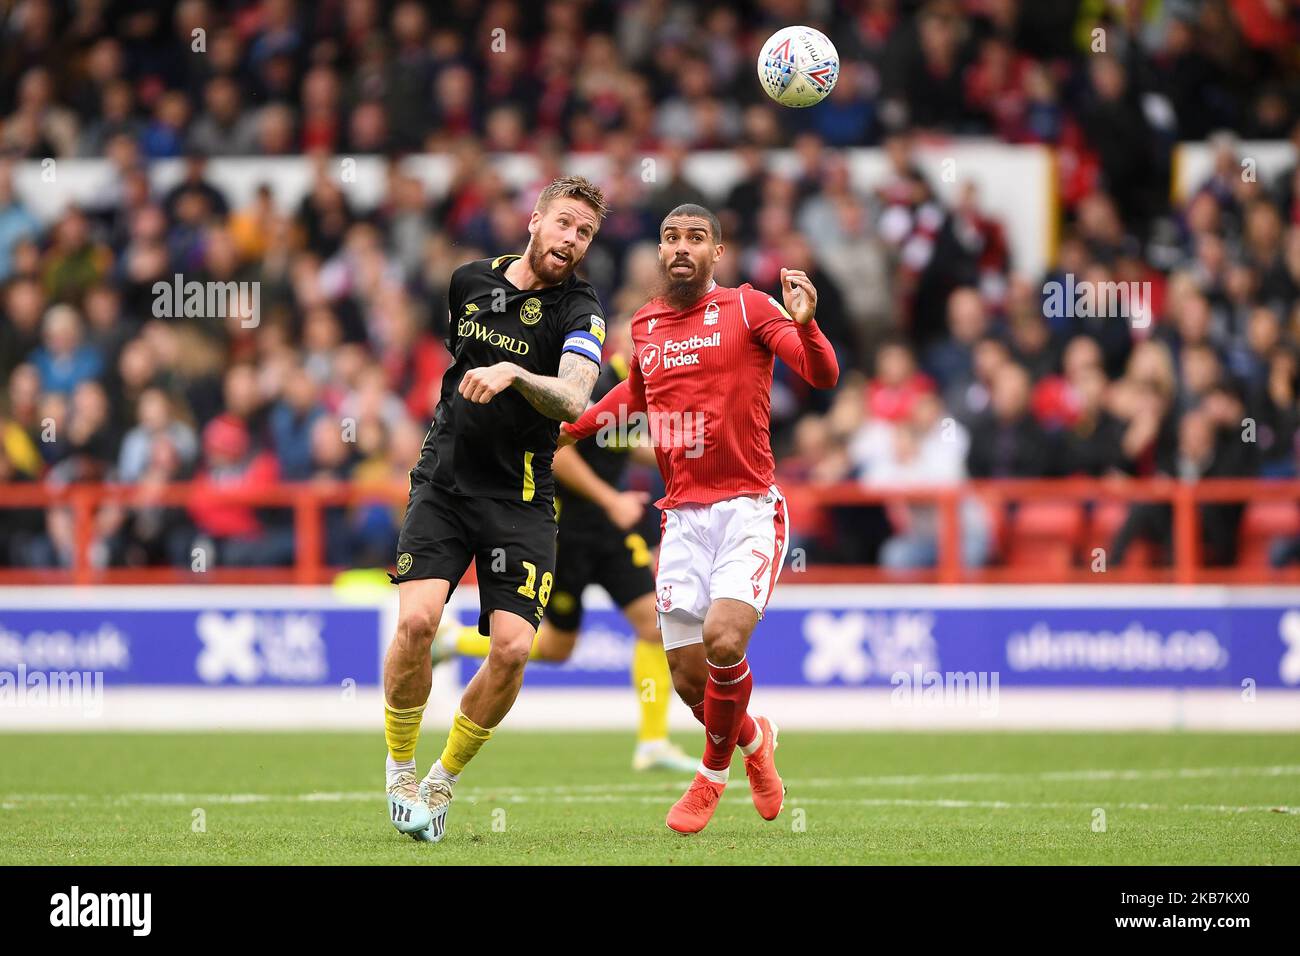 Pontus Jansson (18) of Brentford battles with Lewis Grabban (7) of Nottingham Forest during the Sky Bet Championship match between Nottingham Forest and Brentford at the City Ground, Nottingham on Saturday 5th October 2019. (Photo by Jon Hobley/MI News/NurPhoto) Stock Photo